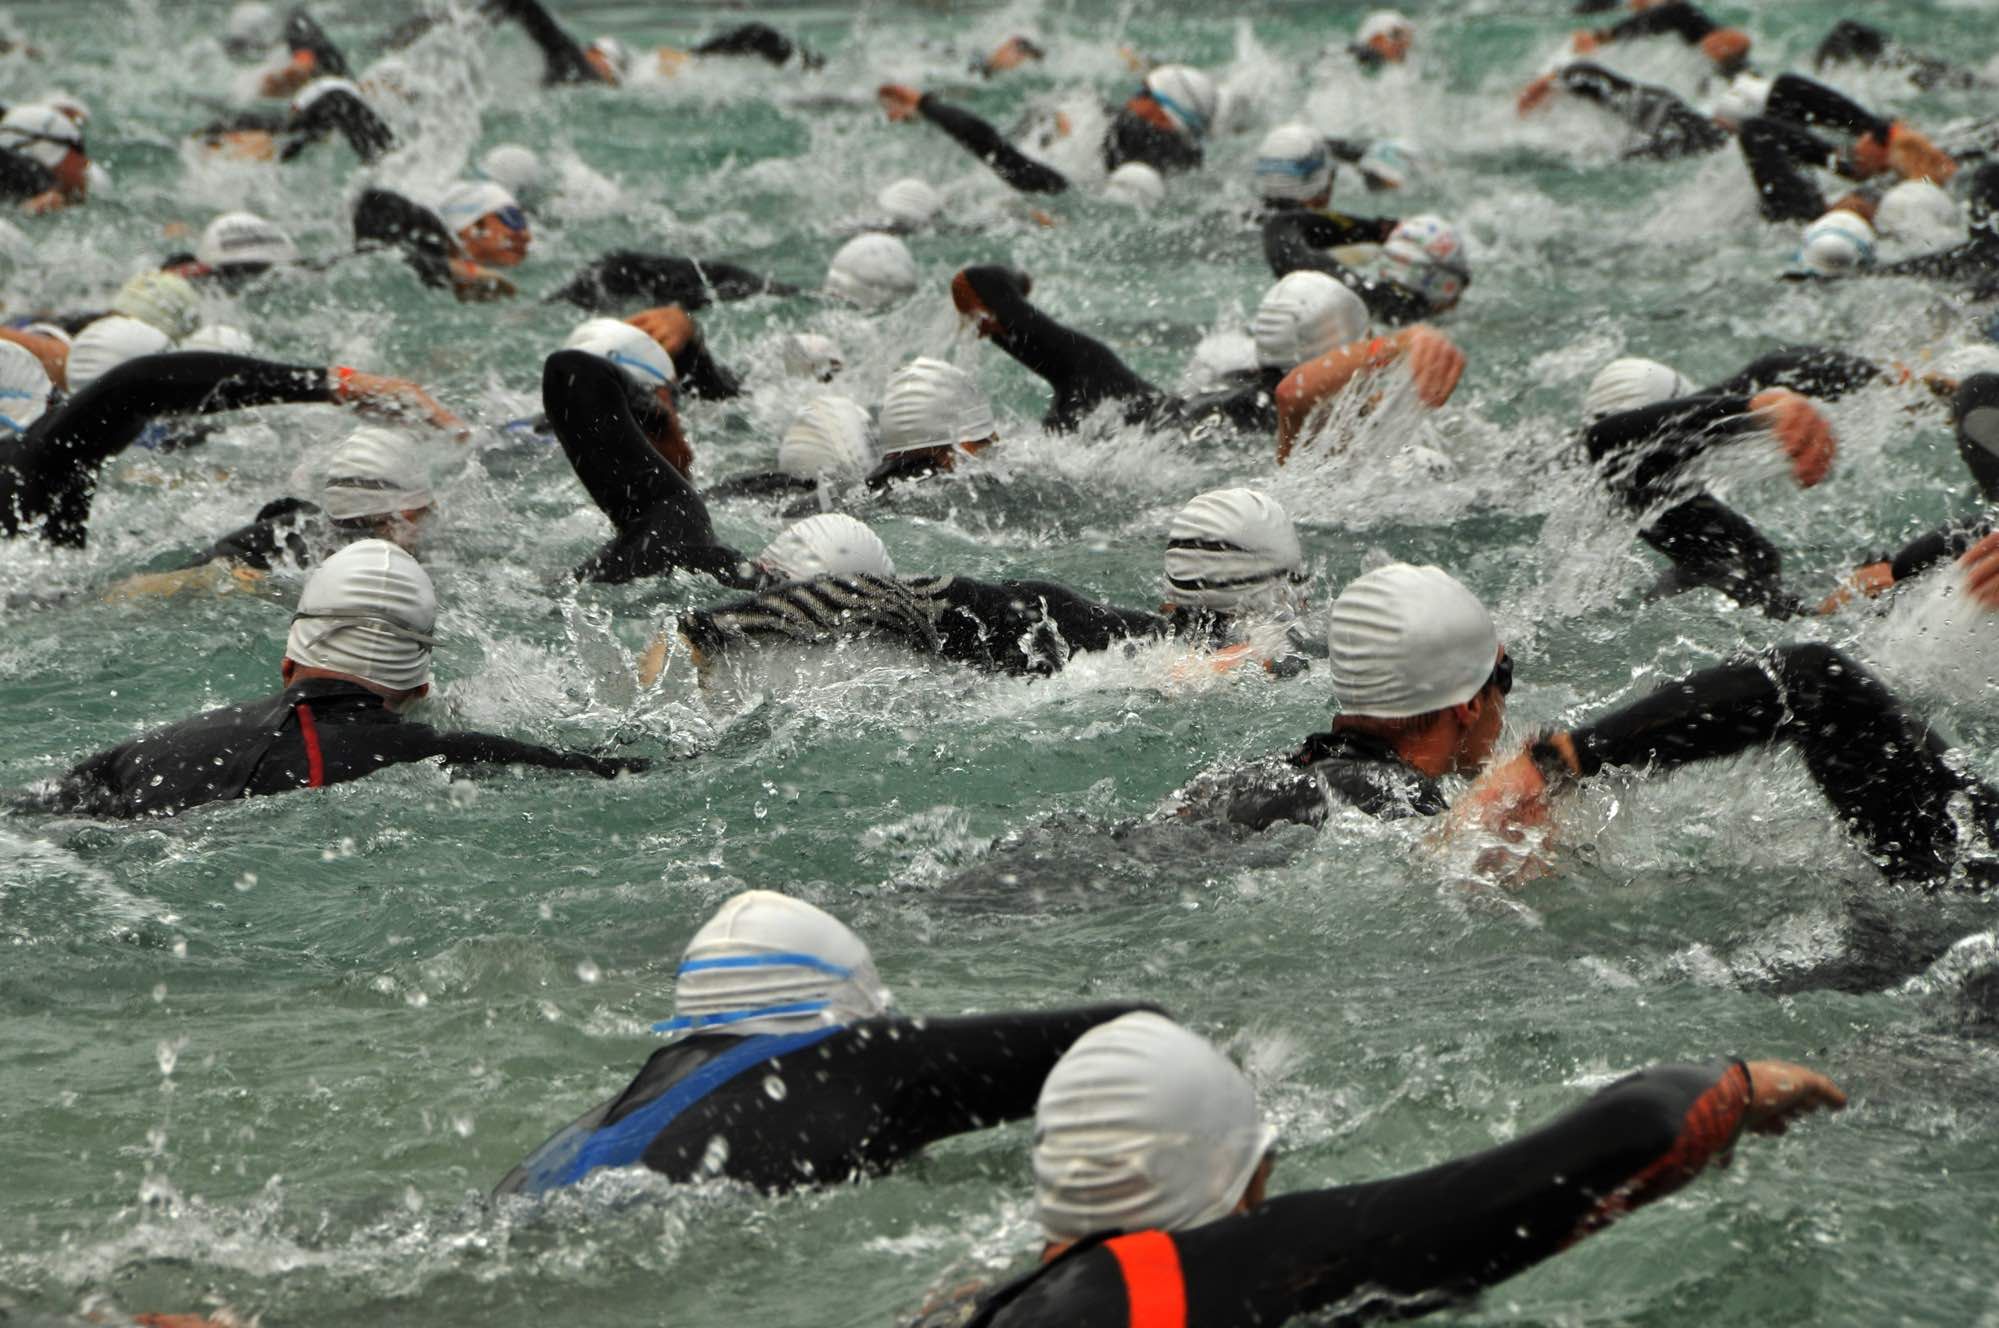 Ticket holders for the Ironman Race are asking for a refund to the COVID-19 cancelled race.